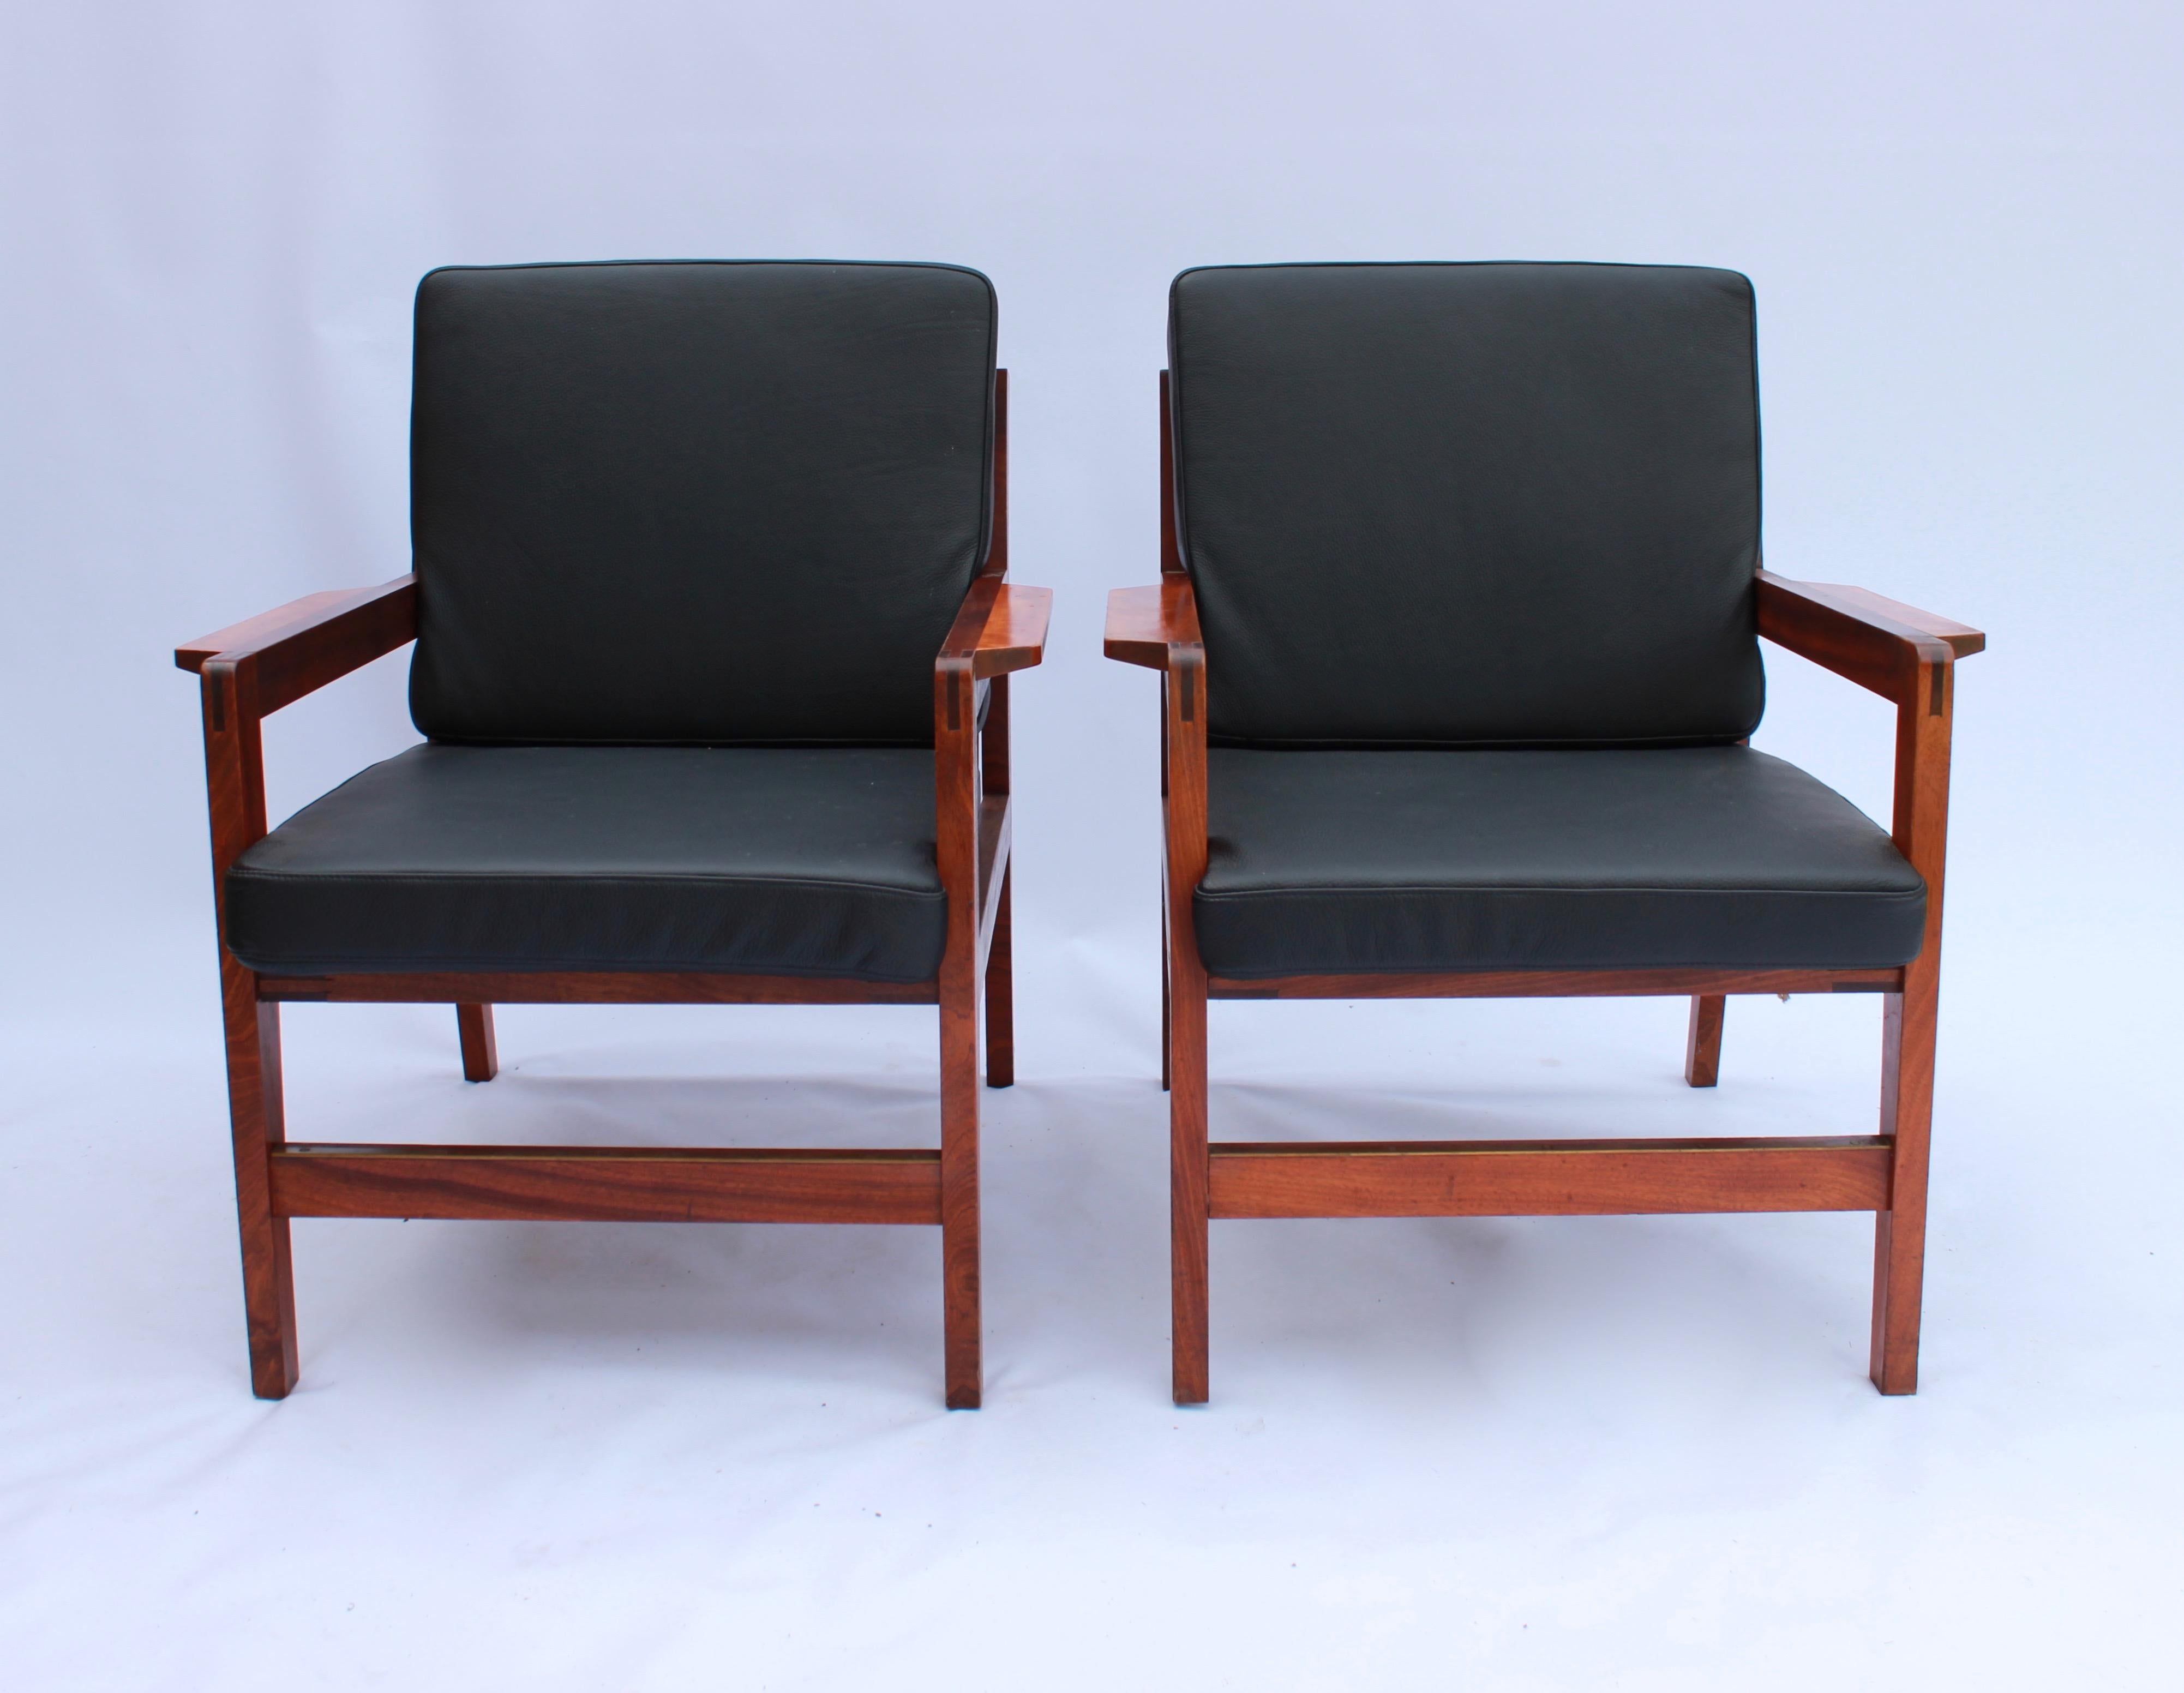 The pair of lounge chairs in polished wood and black Classic leather, designed in Danish style from the 1960s, is a stunning and timeless example of mid-century modern furniture.

The Danish design from the 1960s is celebrated for its clean lines,